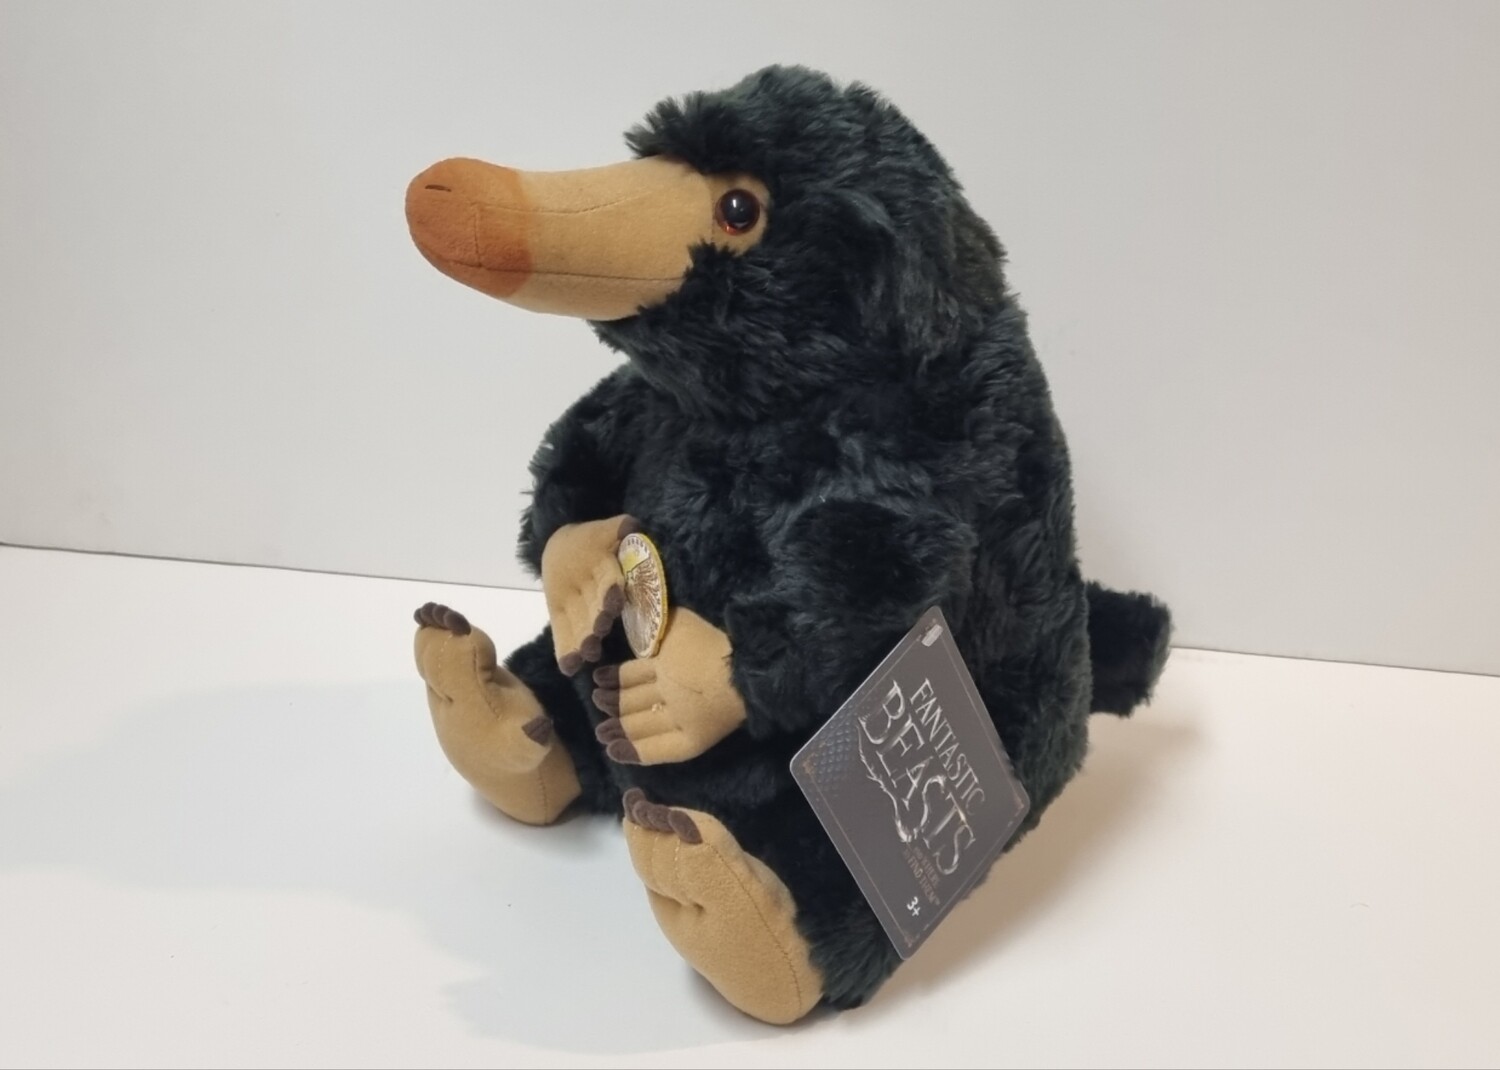 Knuffel, Niffler, Fantastic Beasts The Crimes of Grindelwald